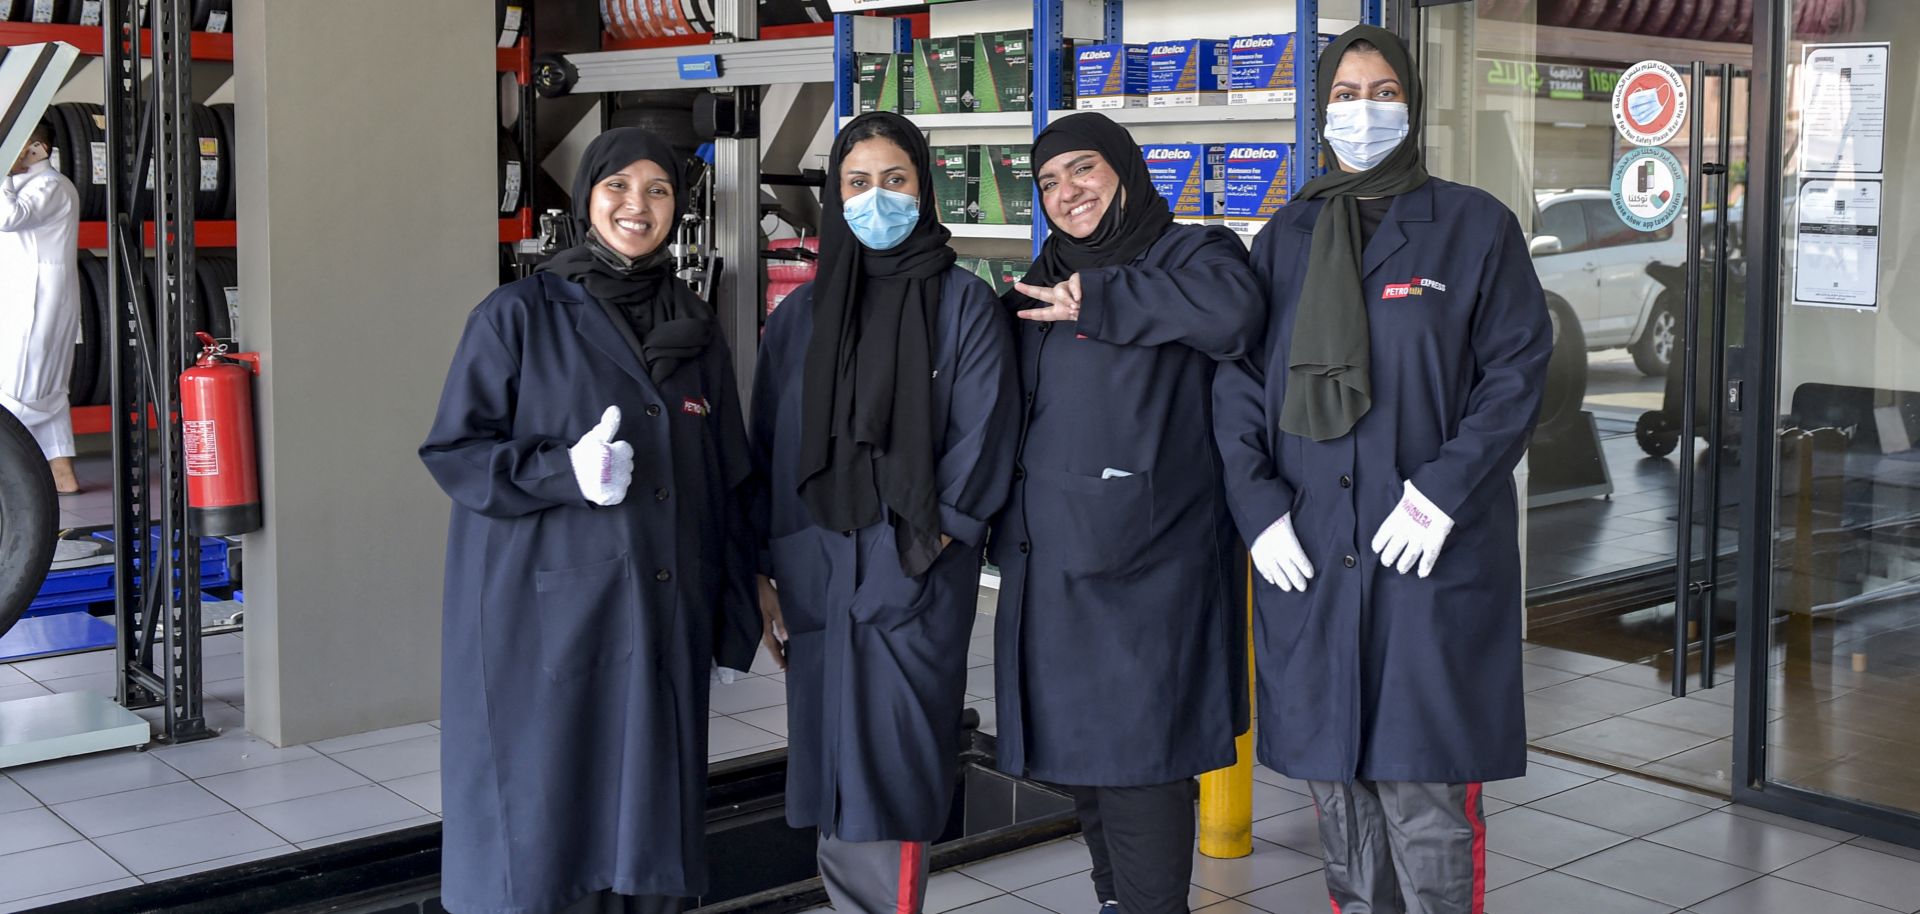 Women mechanics pose for a photo at a car repair and service shop in Jeddah, Saudi Arabia, on Dec. 27, 2021.